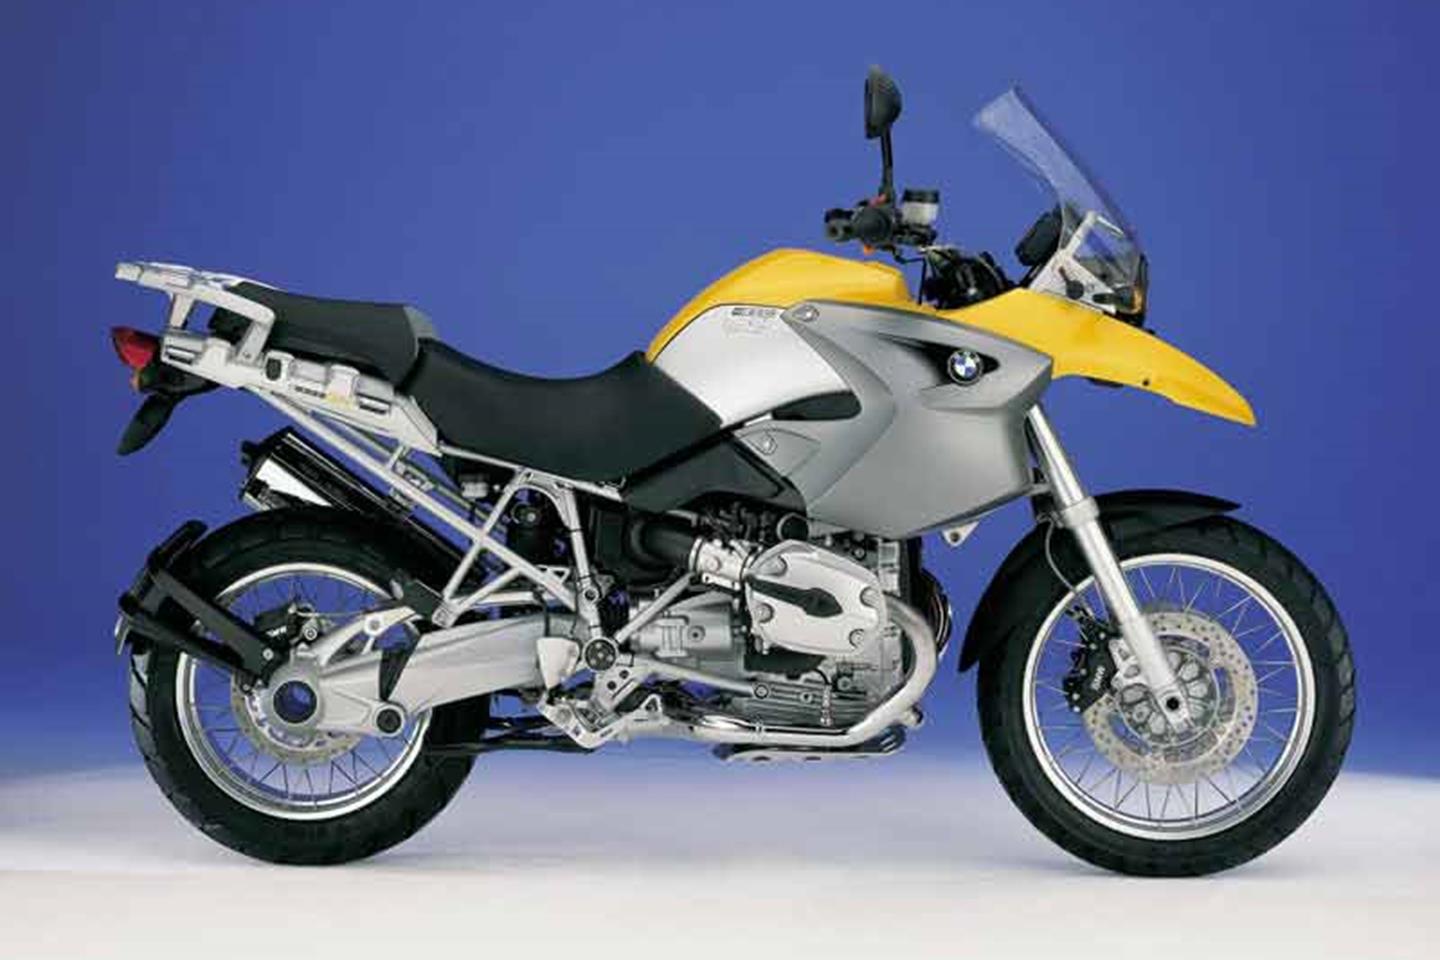 BMW R1200GS (2004-2012) Review | Speed, Specs & Prices